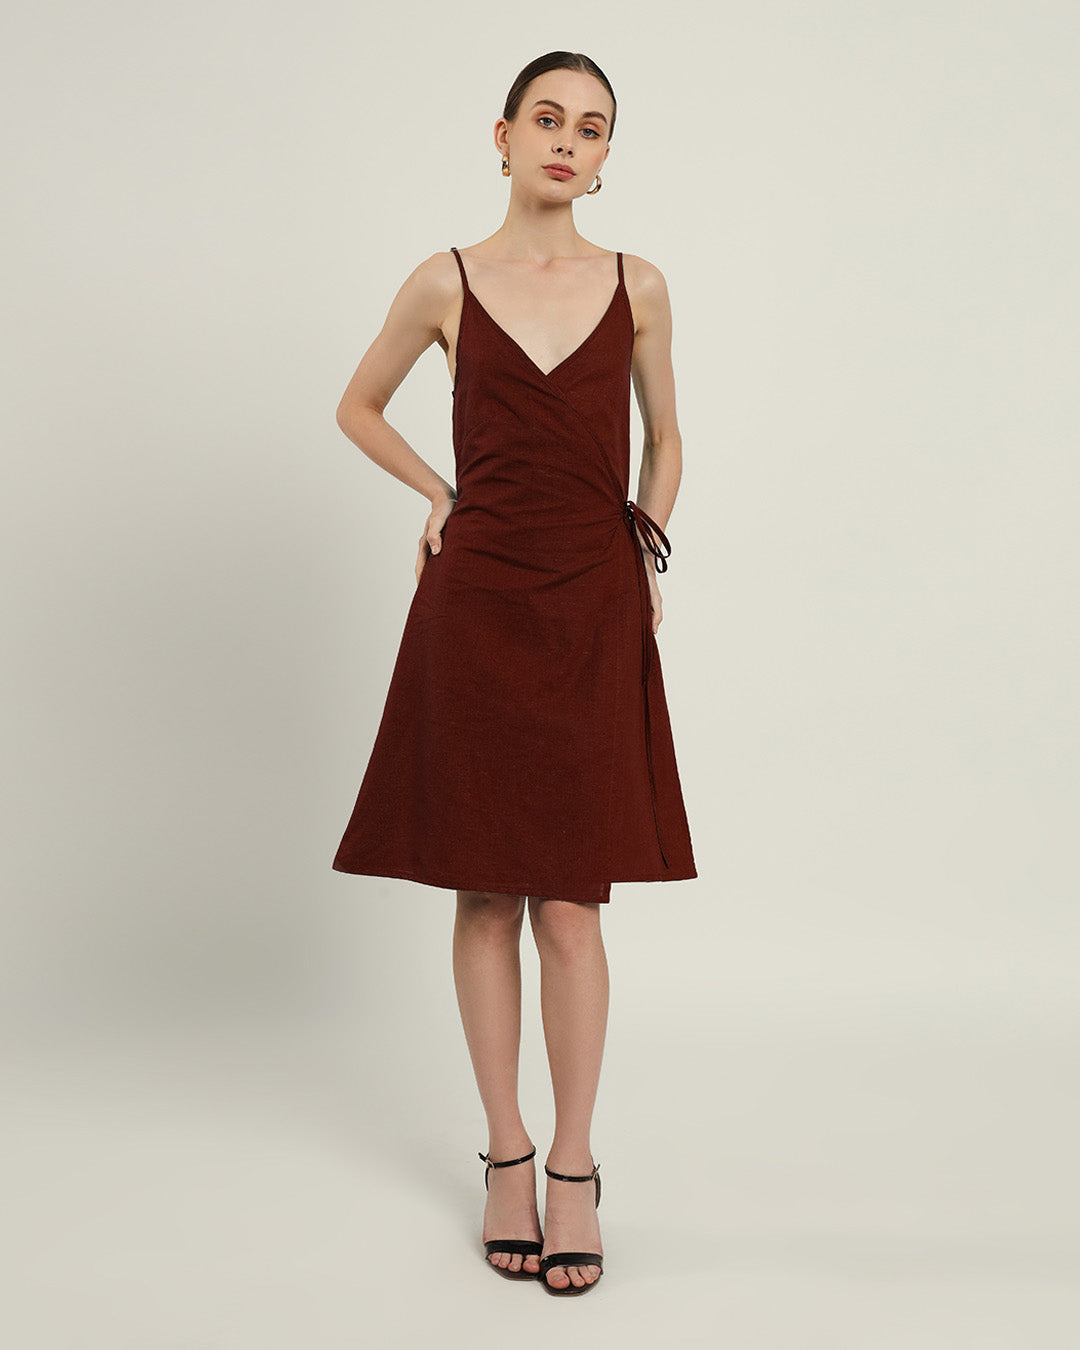 The Chambéry Rouge Dress